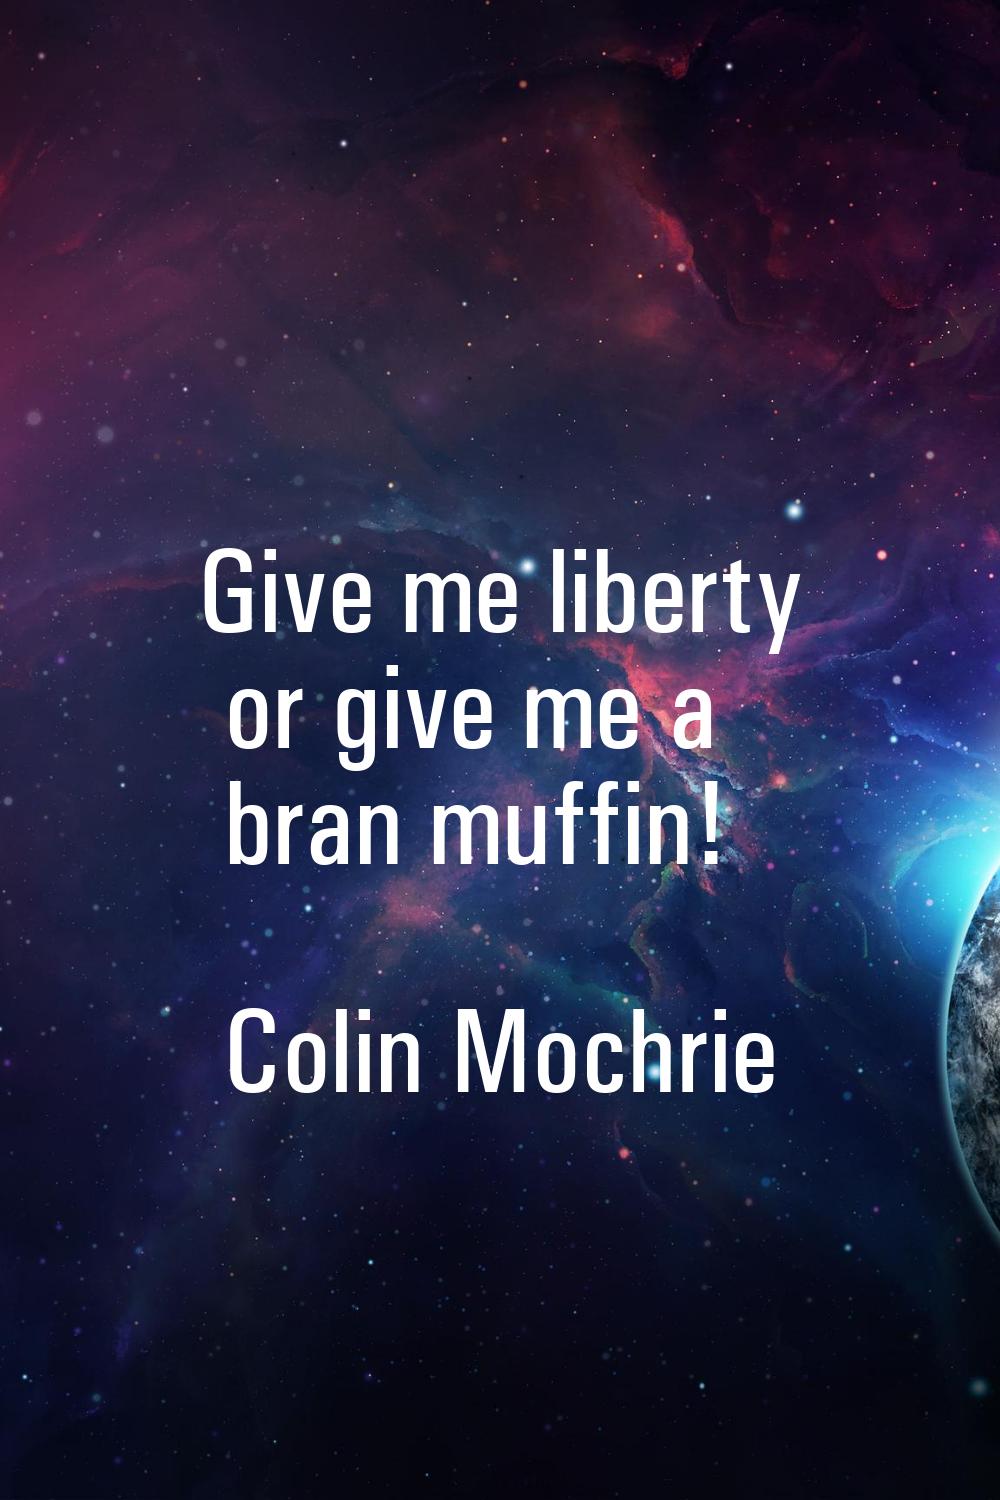 Give me liberty or give me a bran muffin!